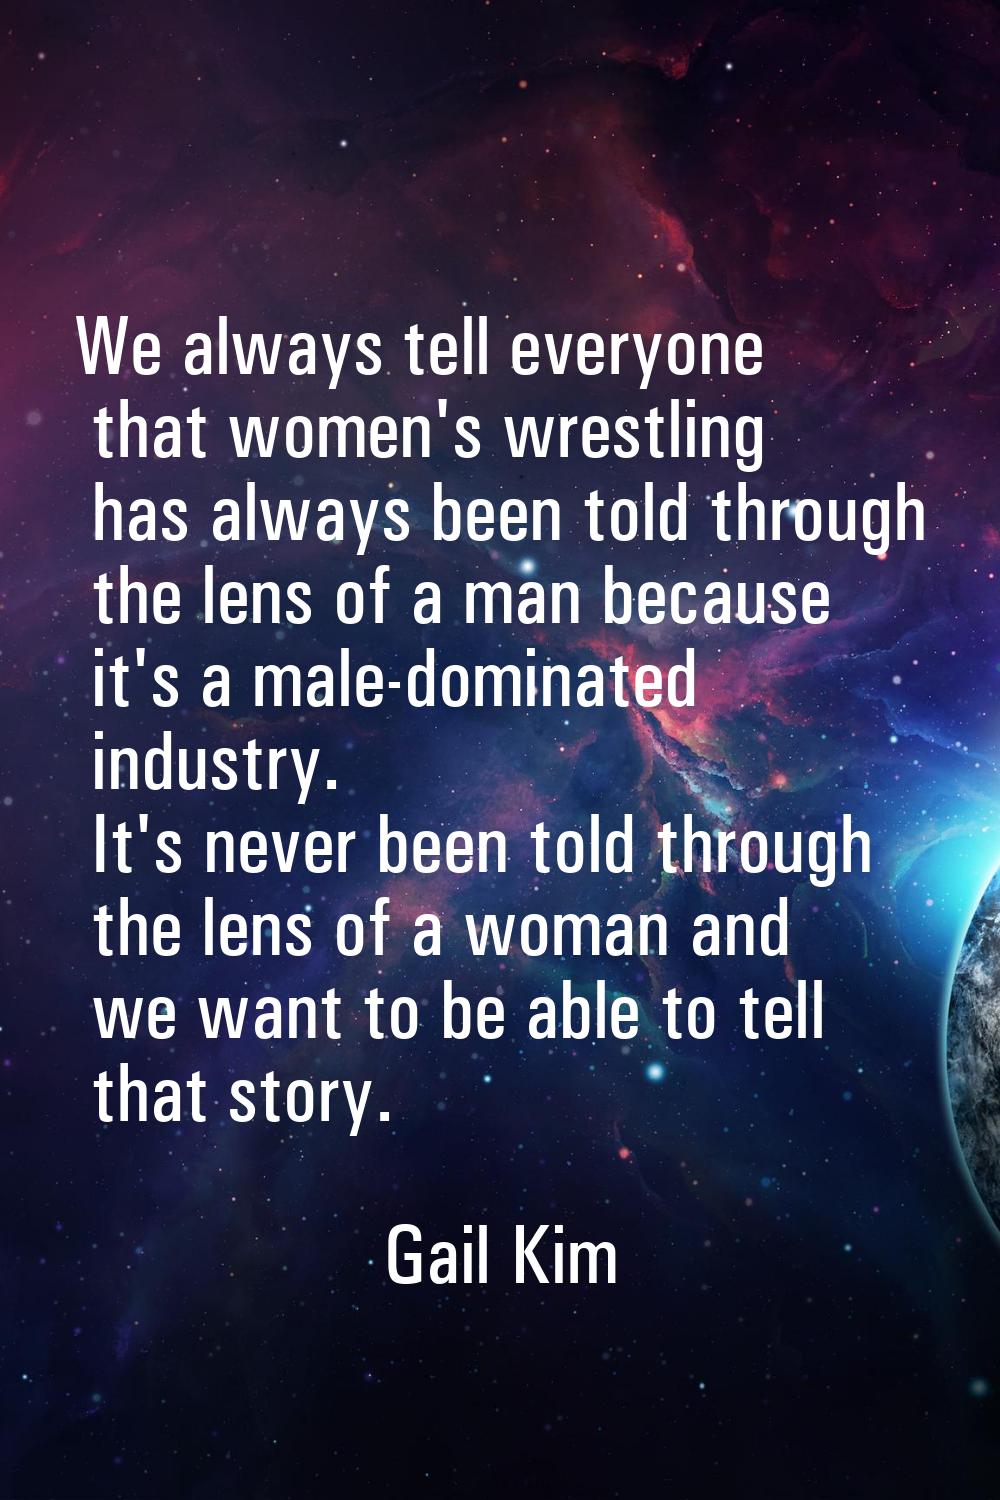 We always tell everyone that women's wrestling has always been told through the lens of a man becau